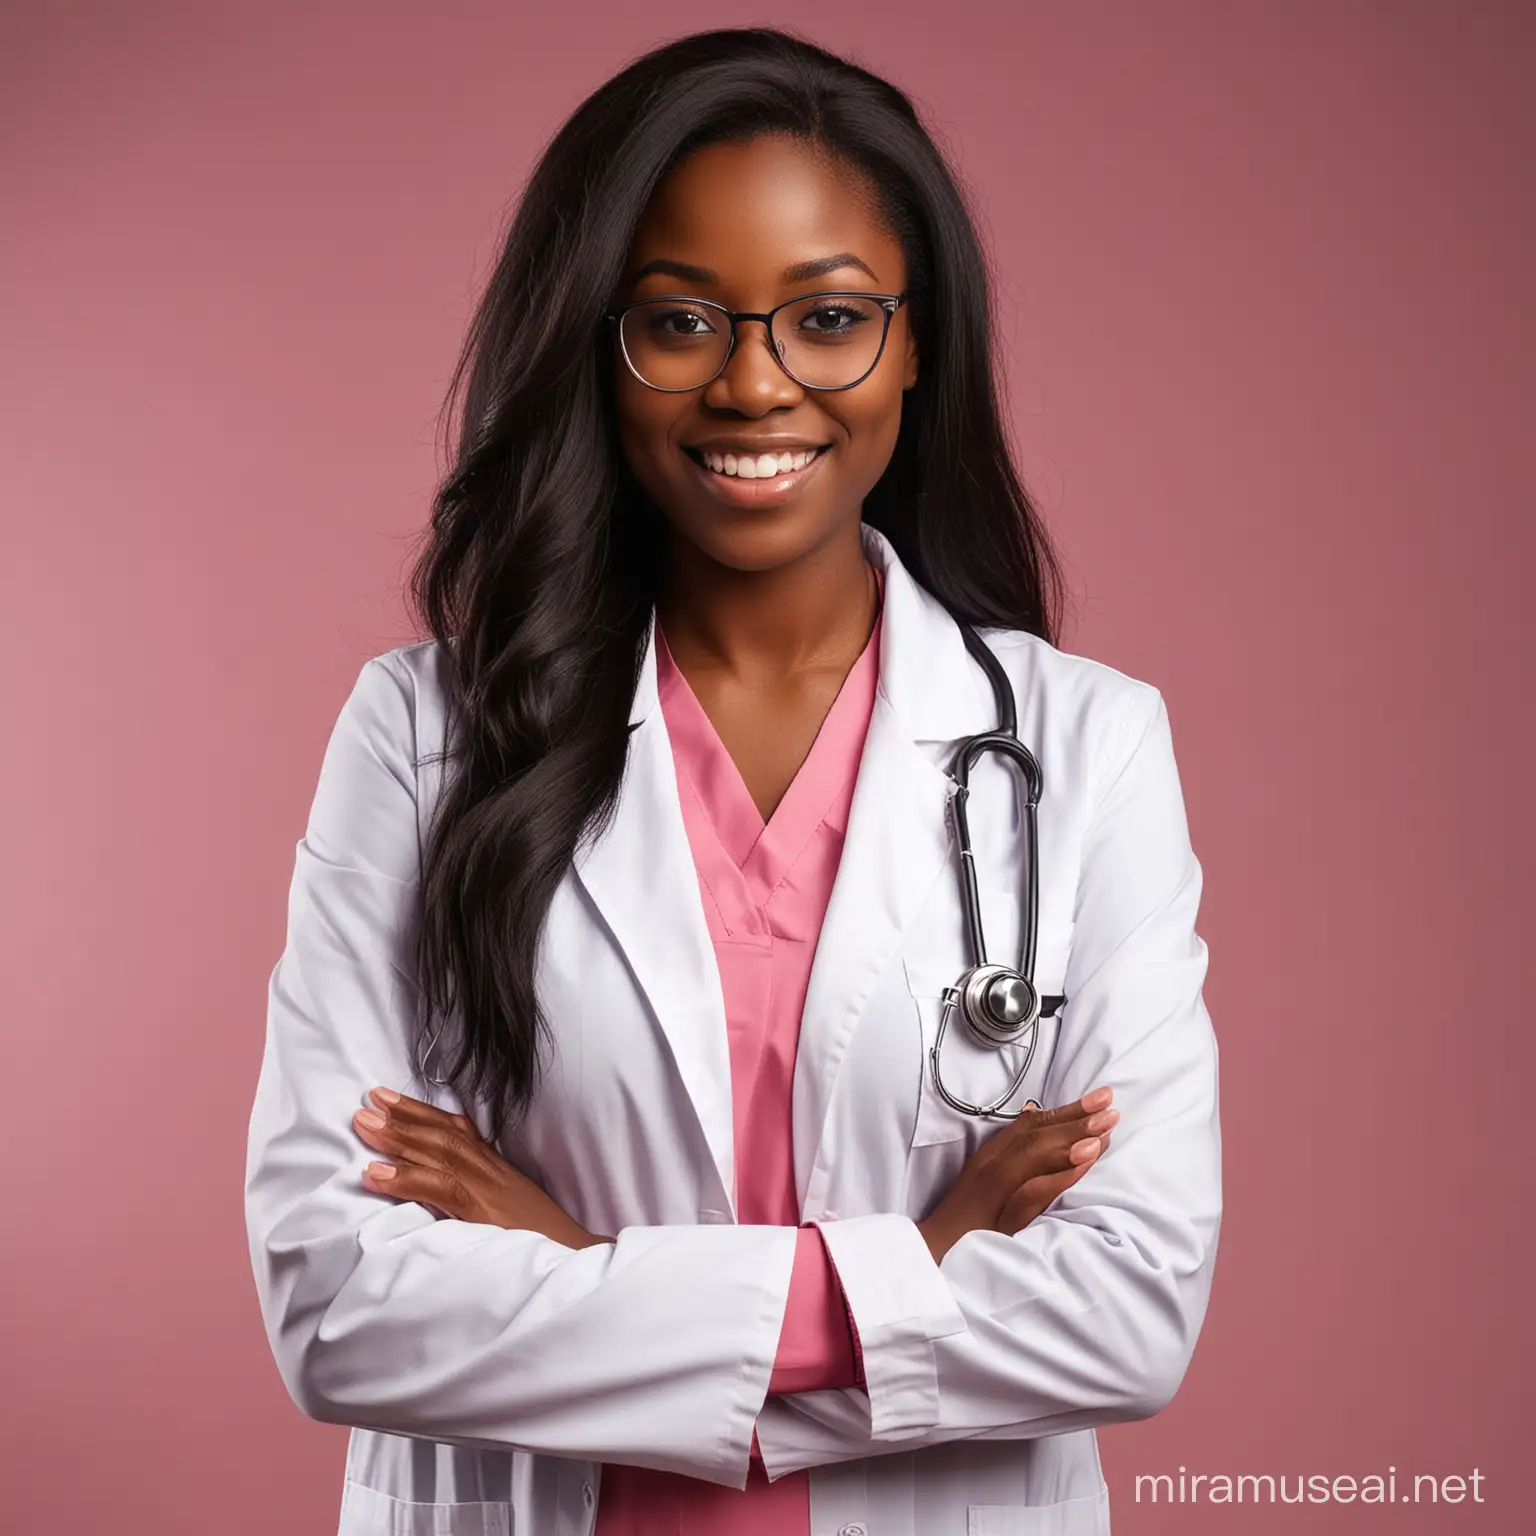 Young Nigerian Female Doctor Smiling in White Coat and Stethoscope